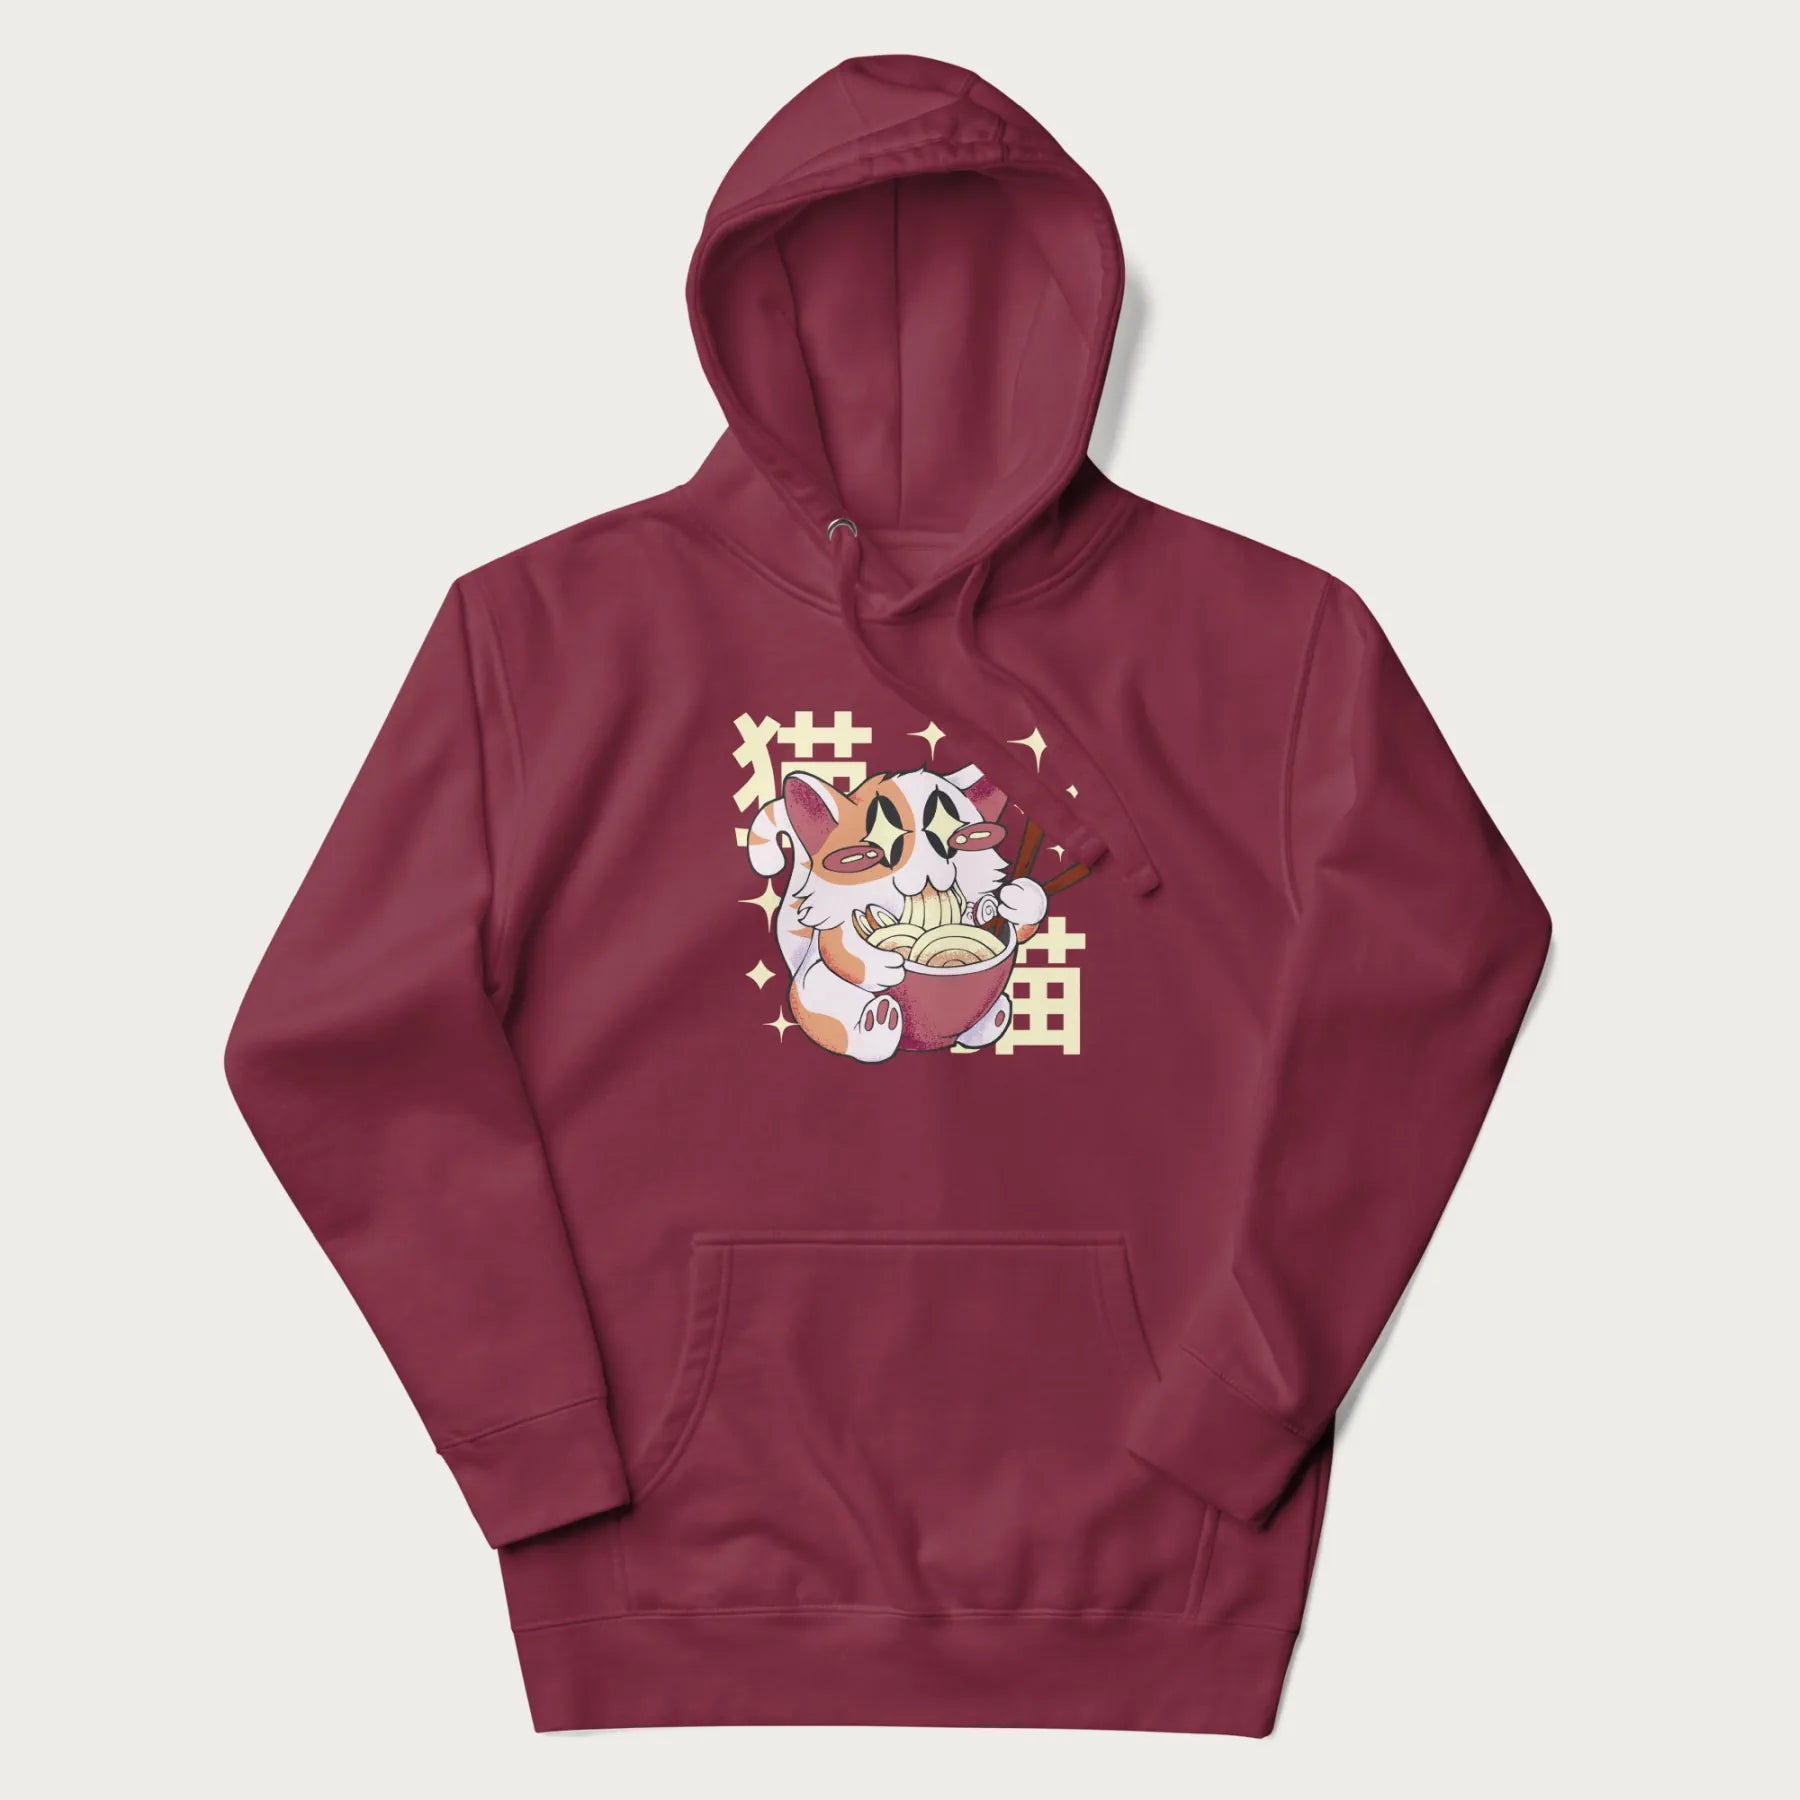 Maroon hoodie with Japanese graphic of a cat eating ramen with Japanese text '猫' in the background.